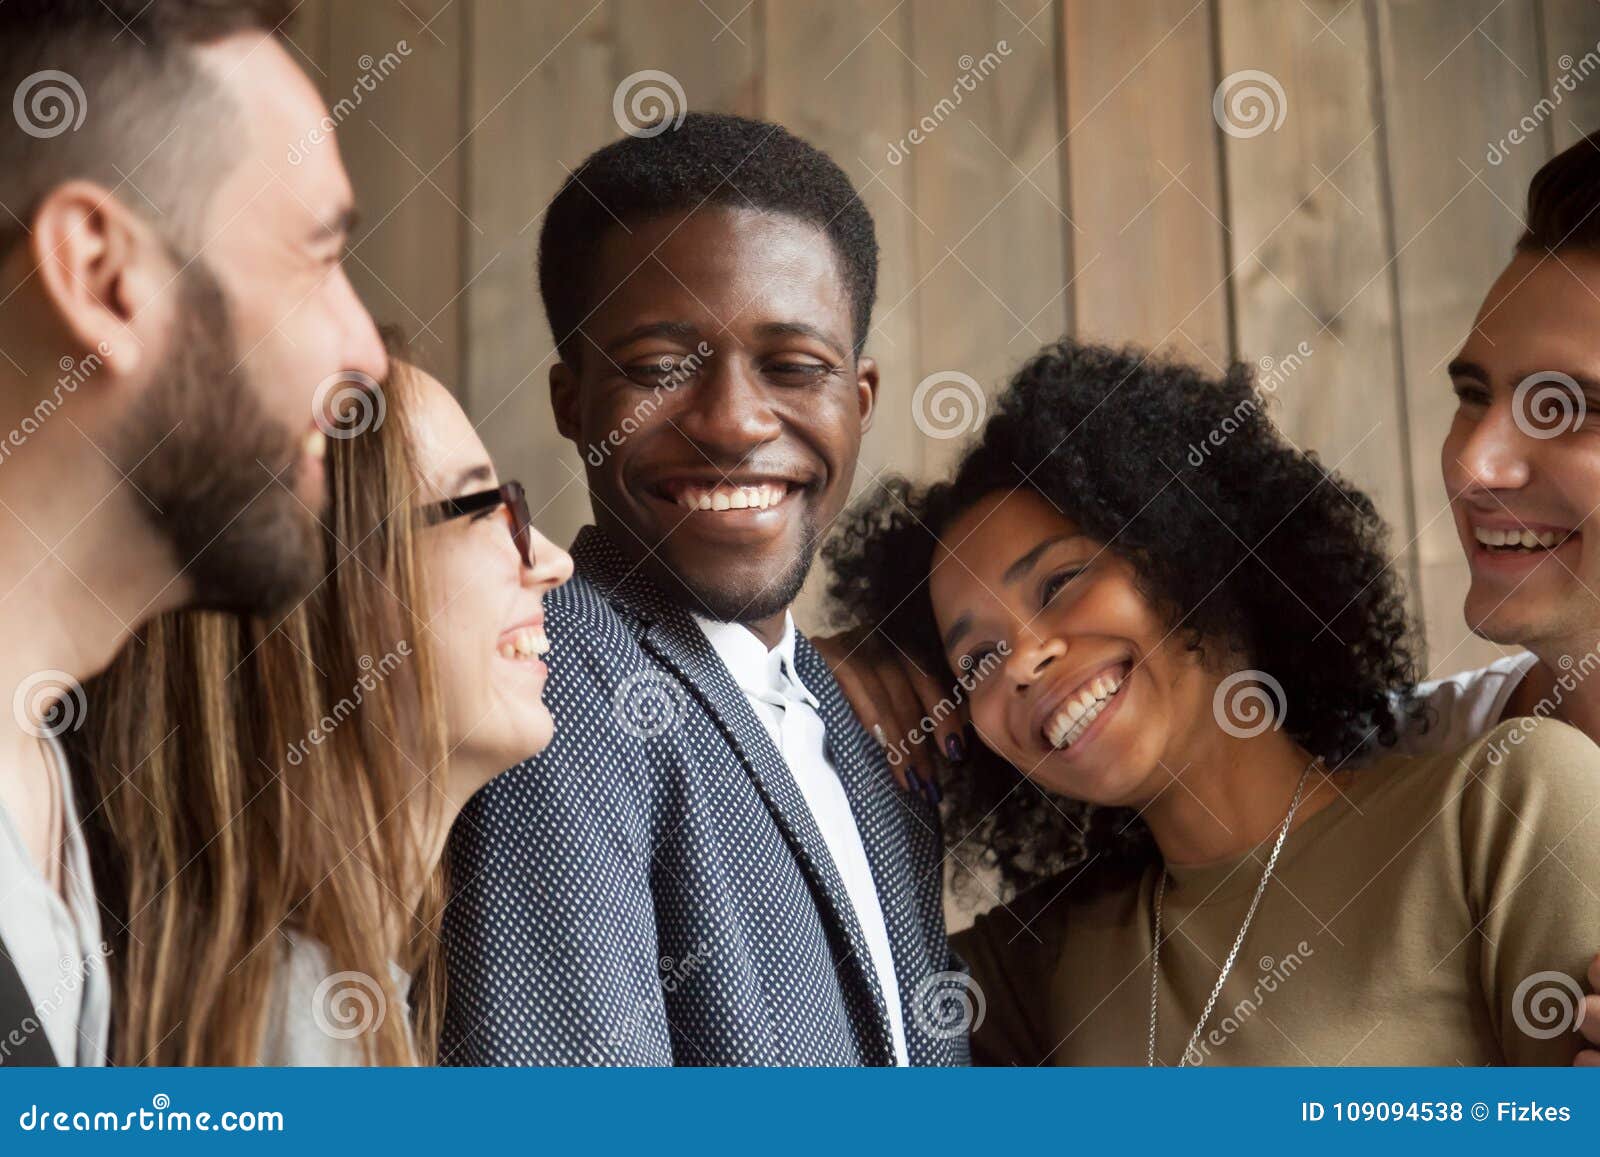 happy diverse black and white people group smiling bonding toget